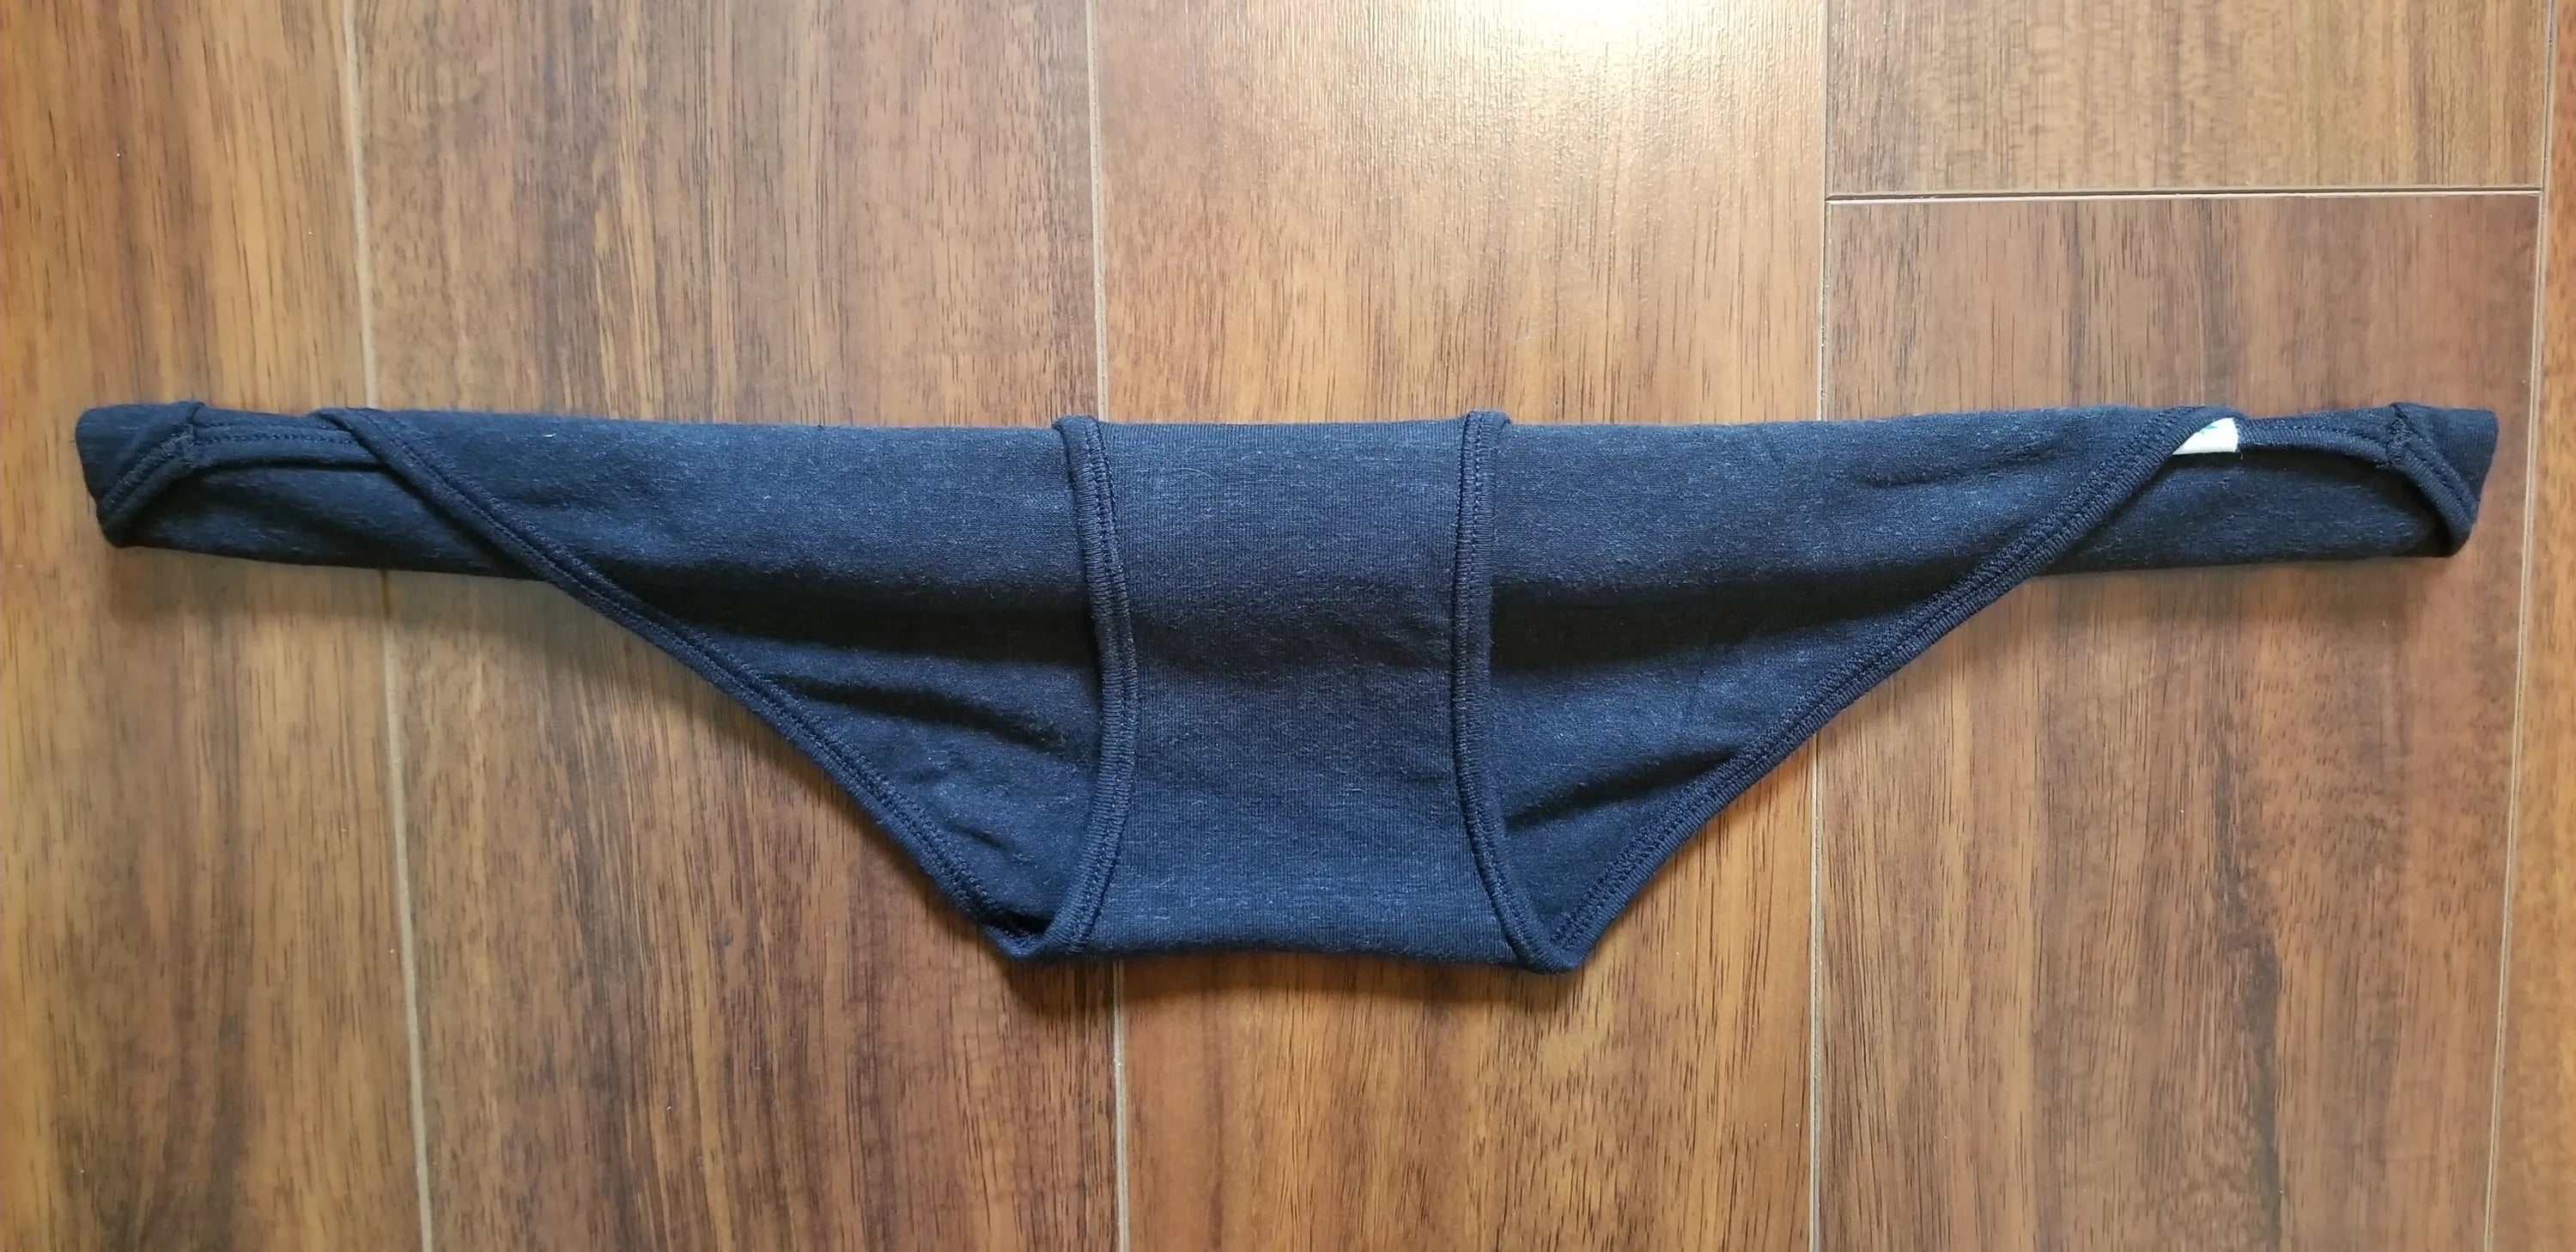 How to fold your underwear to save space